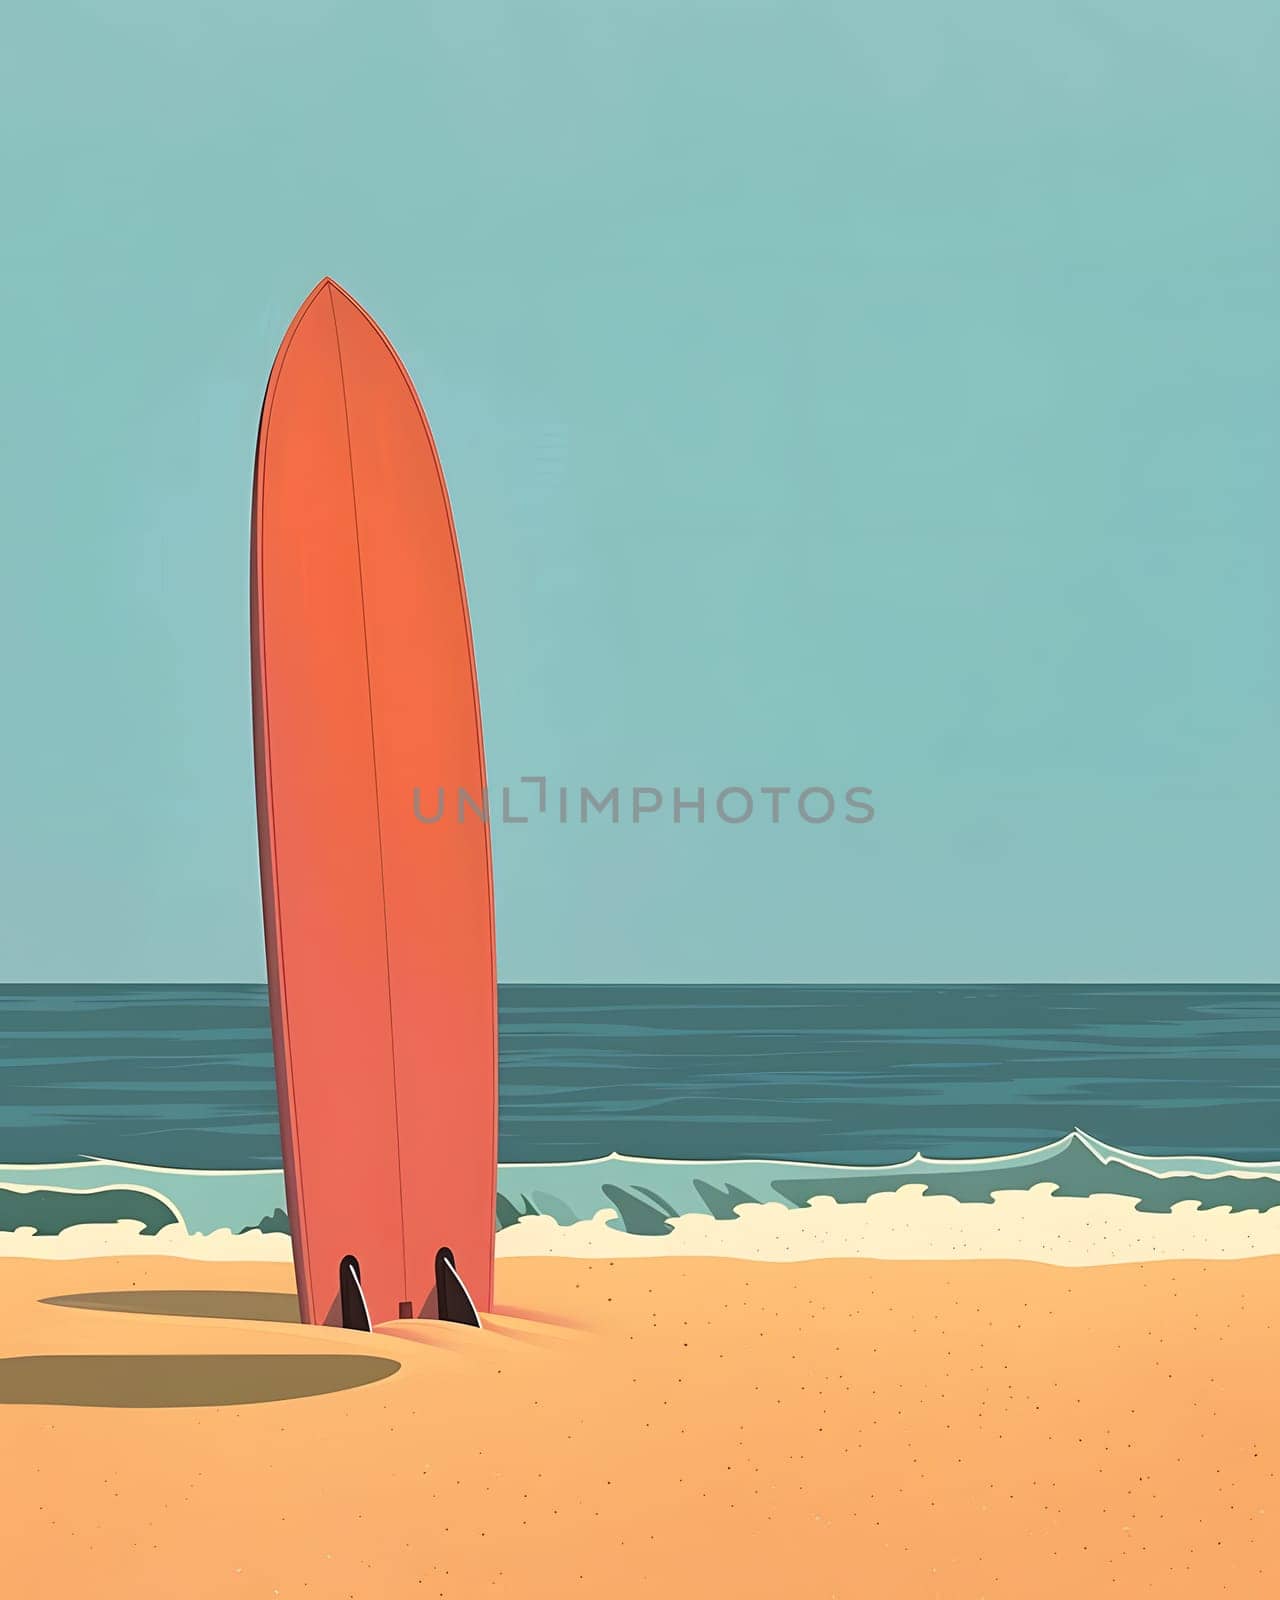 A red surfboard lays on the sandy beach, next to the azure water under the clear sky. The wooden surfboard contrasts with the tints and shades of the ocean, creating a perfect setting for surfing